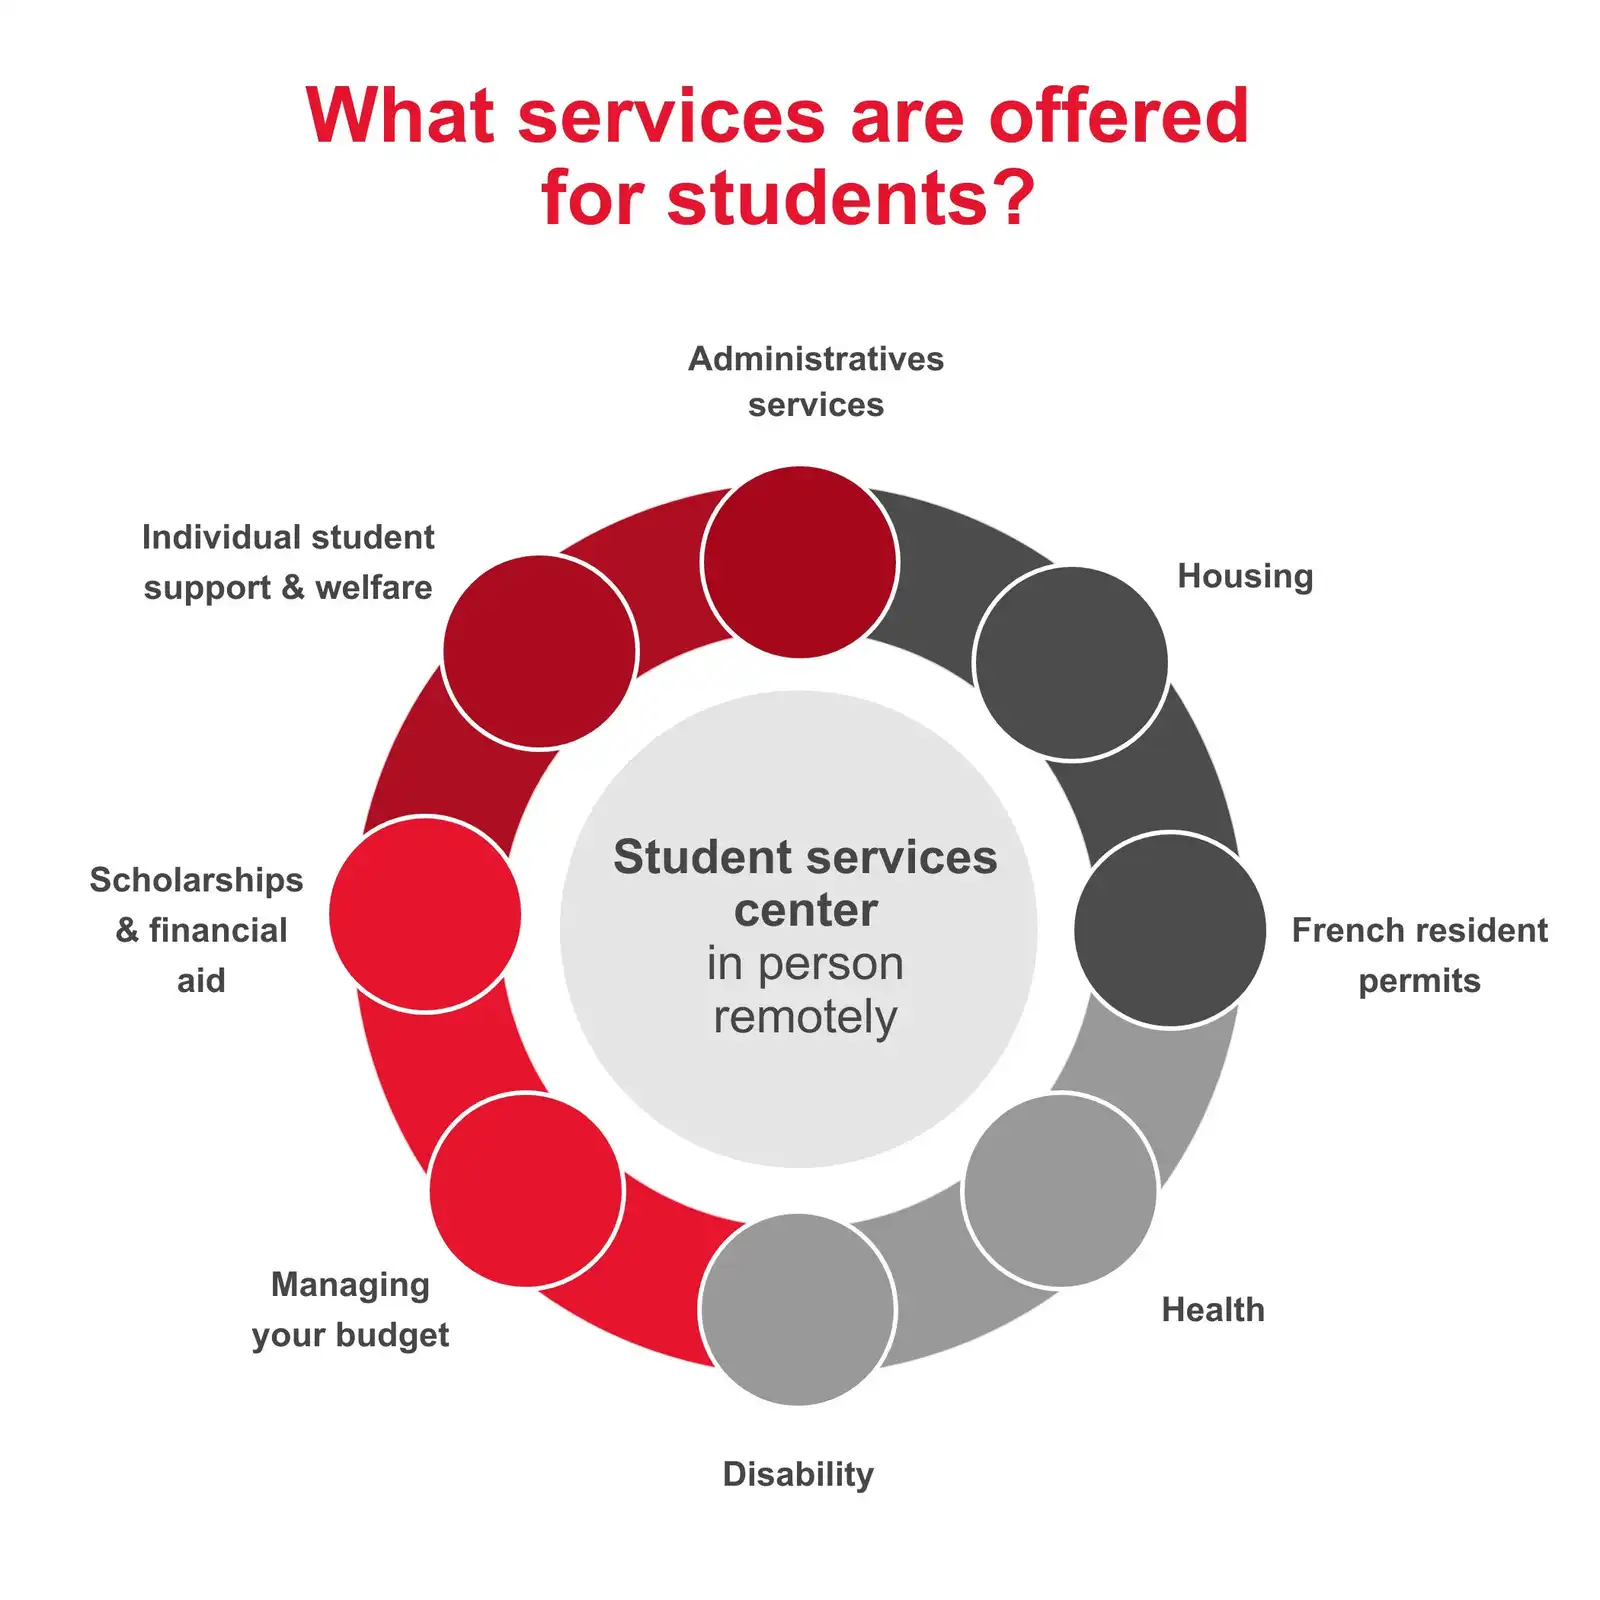 What services are offered for students?